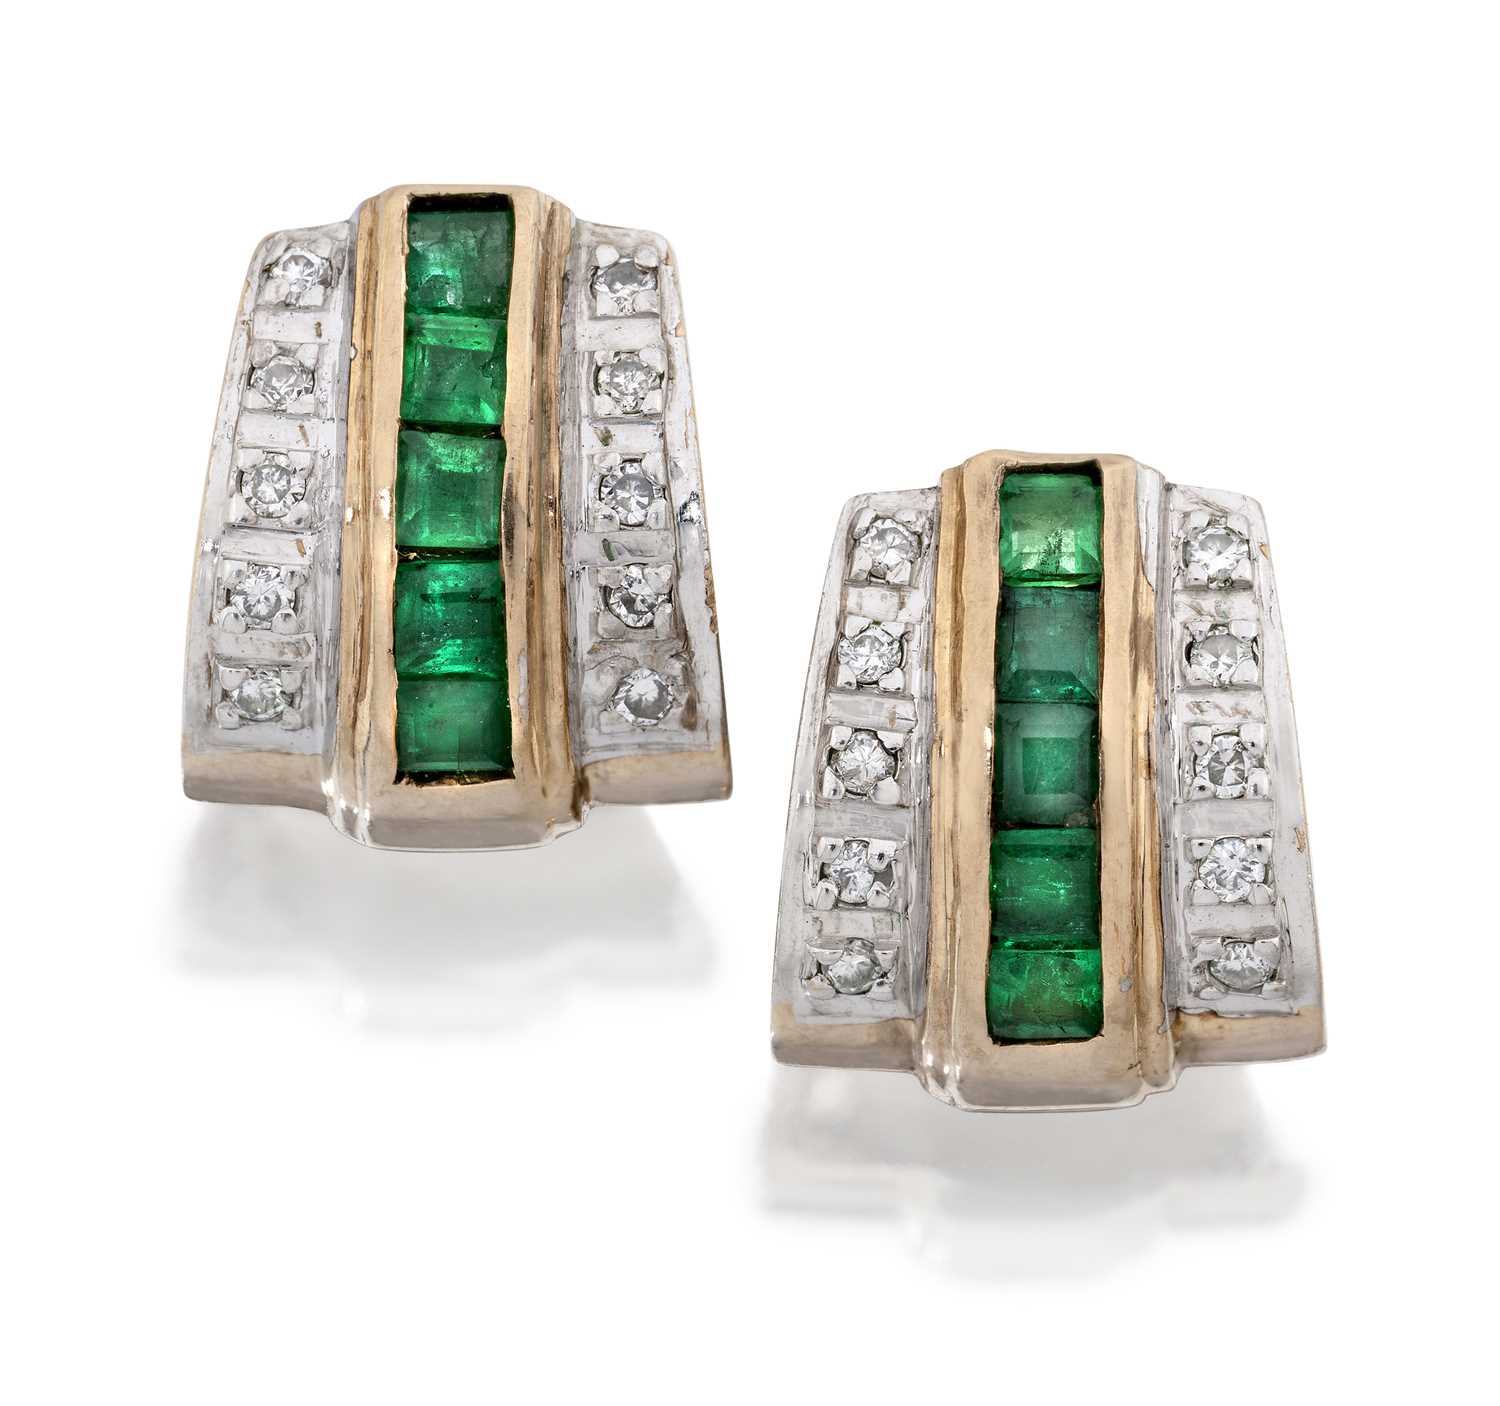 Lot 2096 - An Emerald and Diamond Pendant on Chain and A Pair of 9 Carat Gold Emerald and Diamond Earrings